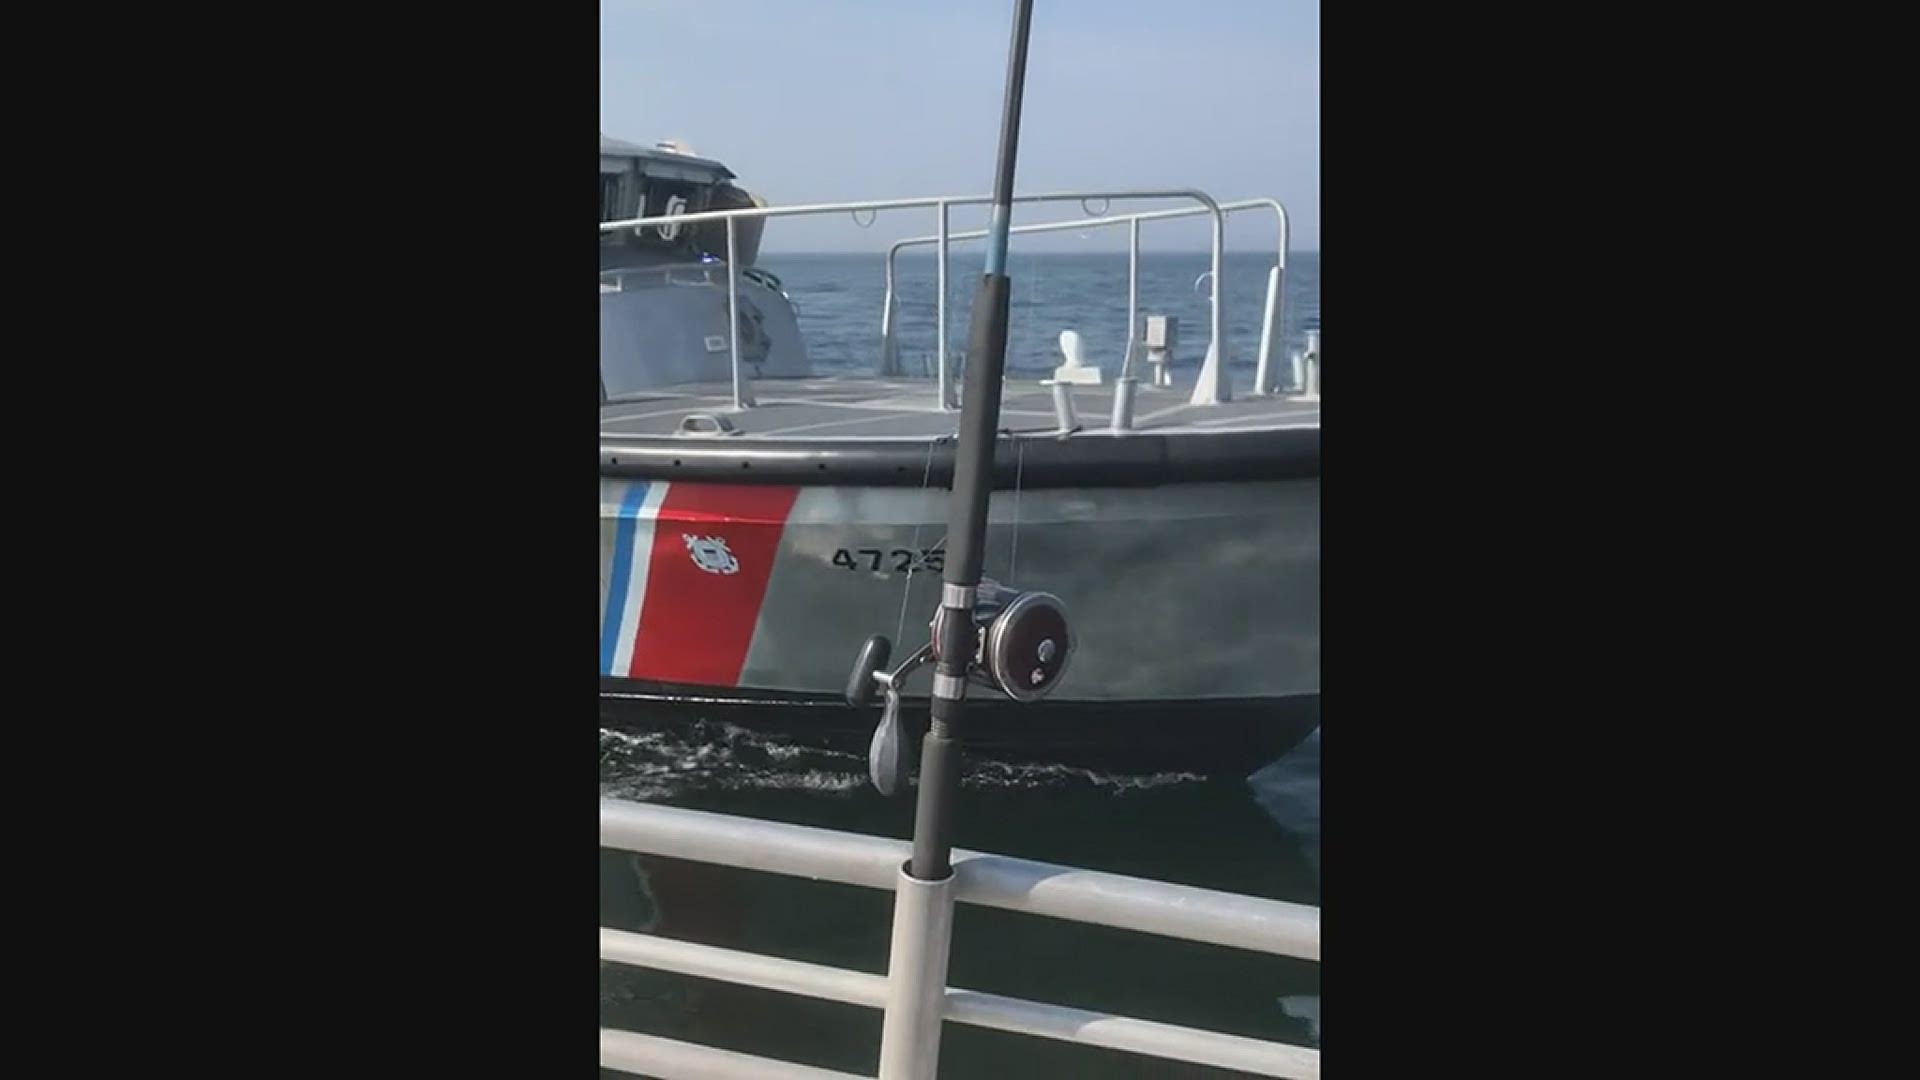 Station Gloucester responded with three of their assets and were joined by a local Gloucester harbormaster. (U.S. Coast Guard Courtesy video\released)